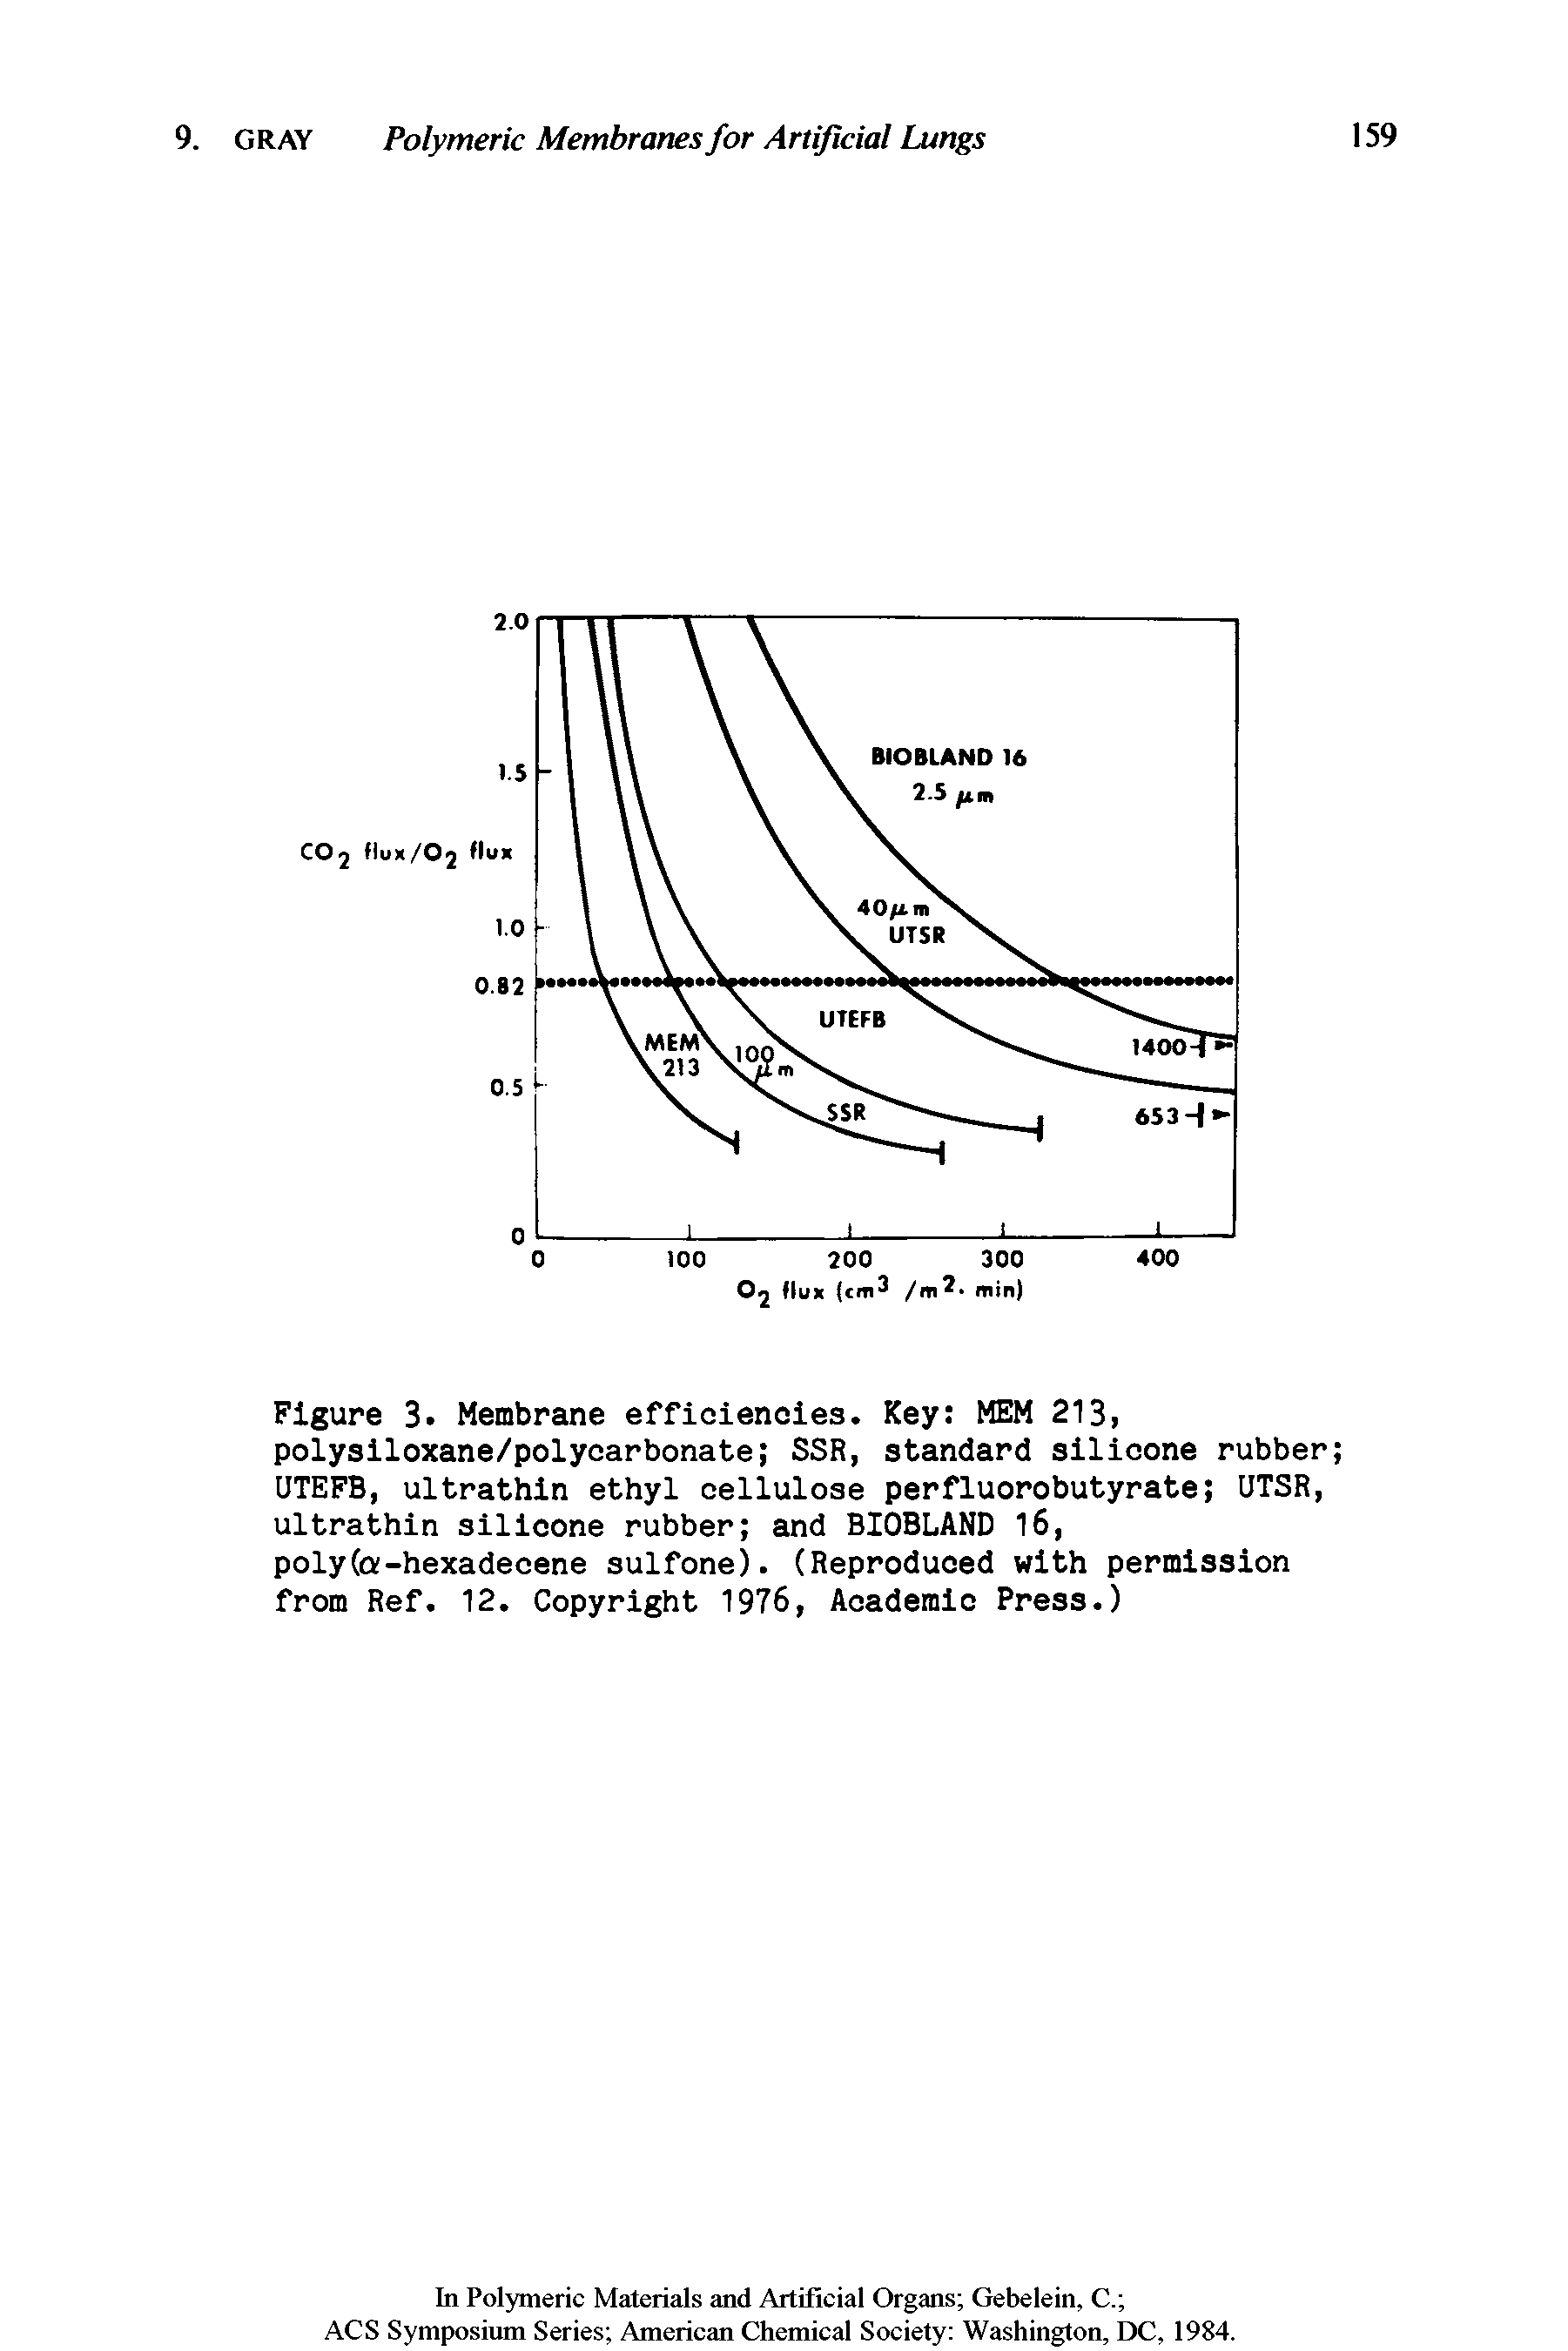 Figure 3. Membrane efficiencies. Key MEM 213i polysiloxane/polycarbonate SSR, standard silicone rubber UTEFB, ultrathin ethyl cellulose perfluorobutyrate UTSR, ultrathin silicone rubber and BIOBLAND 16, polyCa-hexadecene sulfone). (Reproduced with permission from Ref. 12. Copyright 1976, Academic Press.)...